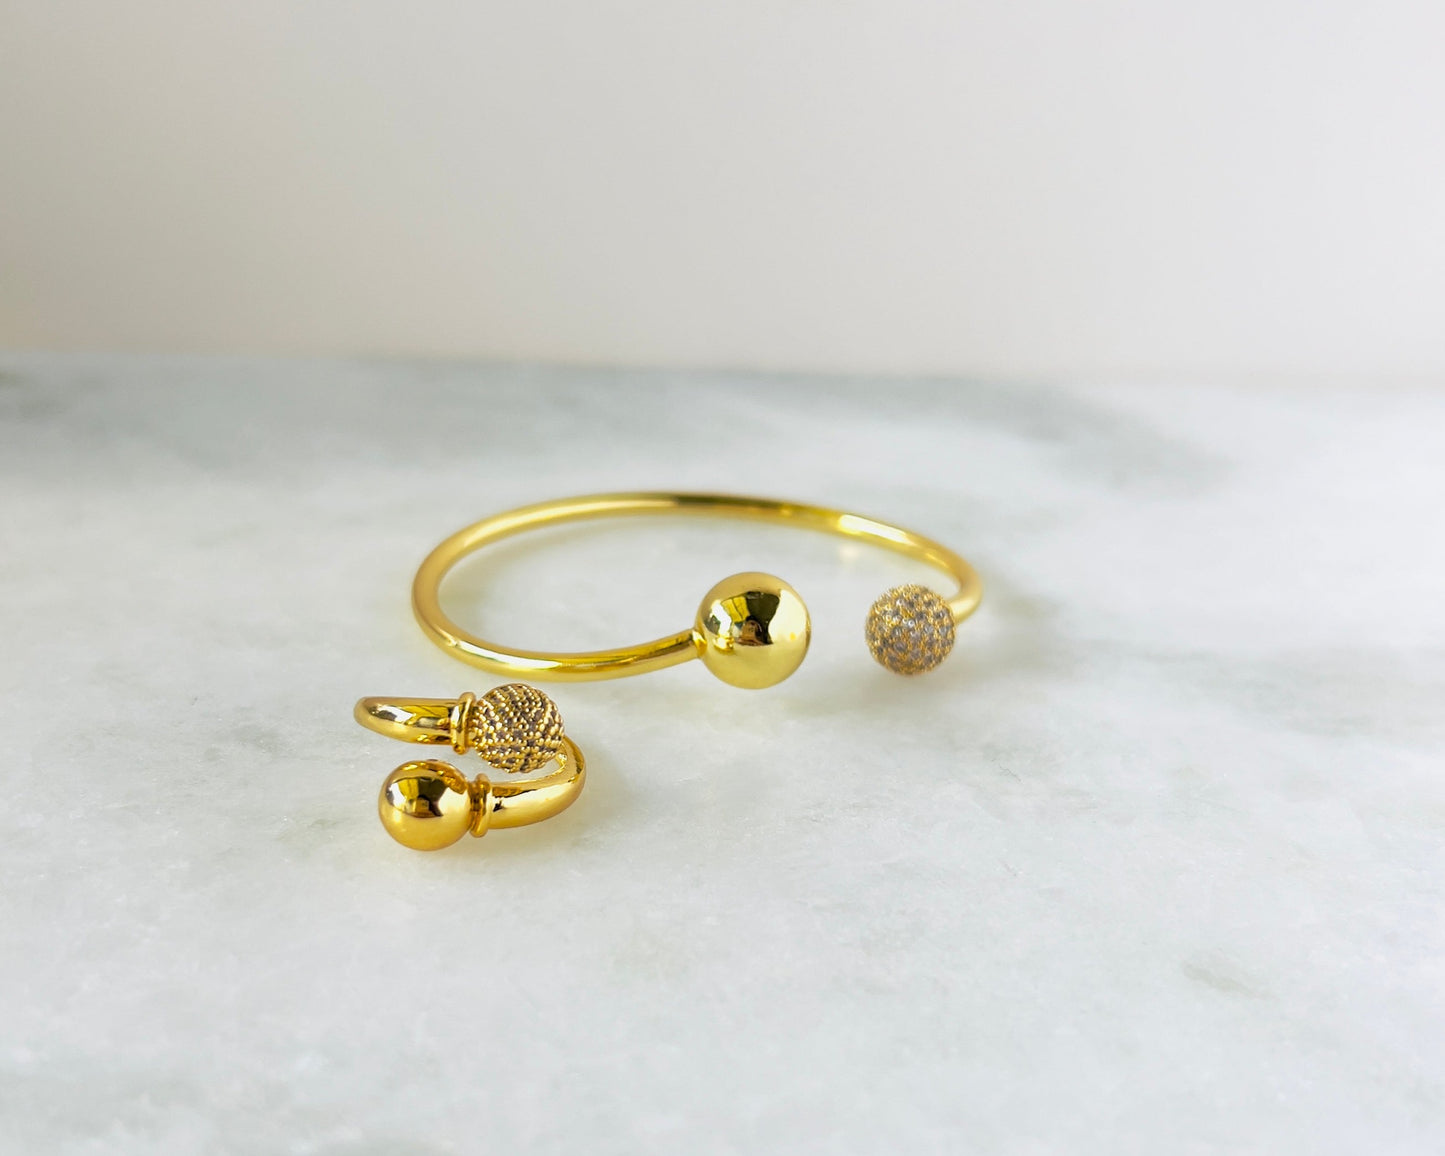 Luxurious gold-plated bangle with distinctive ball ends, one solid and one adorned with shimmering cubic zirconia stones. Perfect for those seeking a blend of classic elegance and modern sparkle